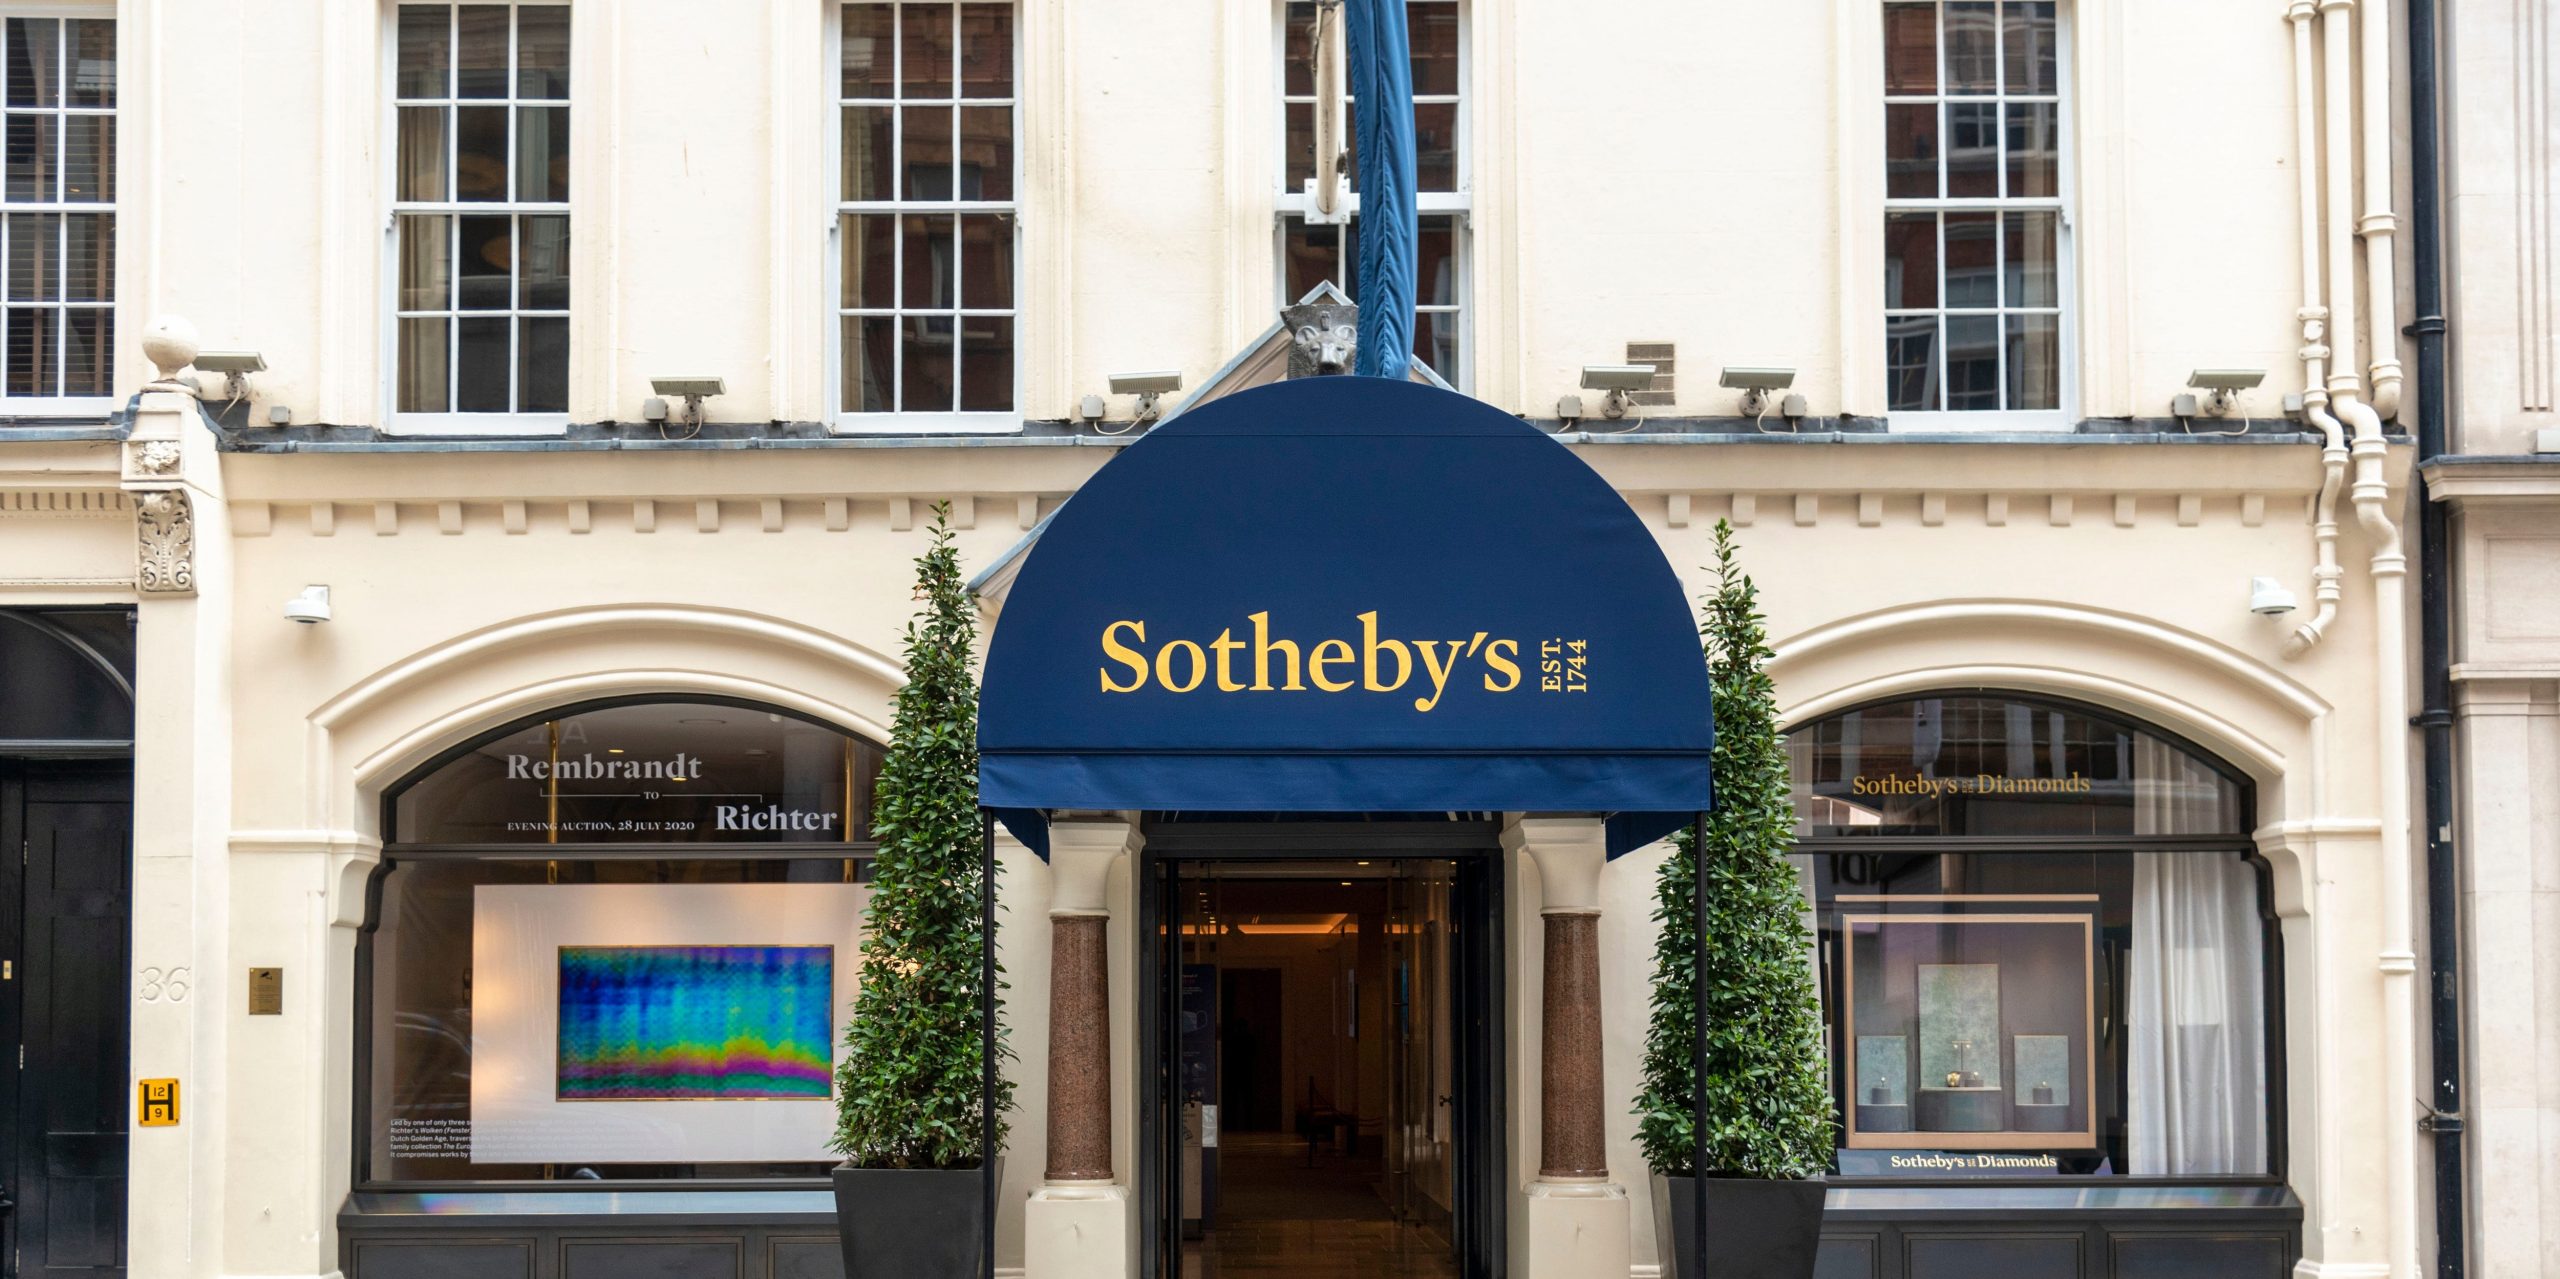 Sotheby's luxury auction house